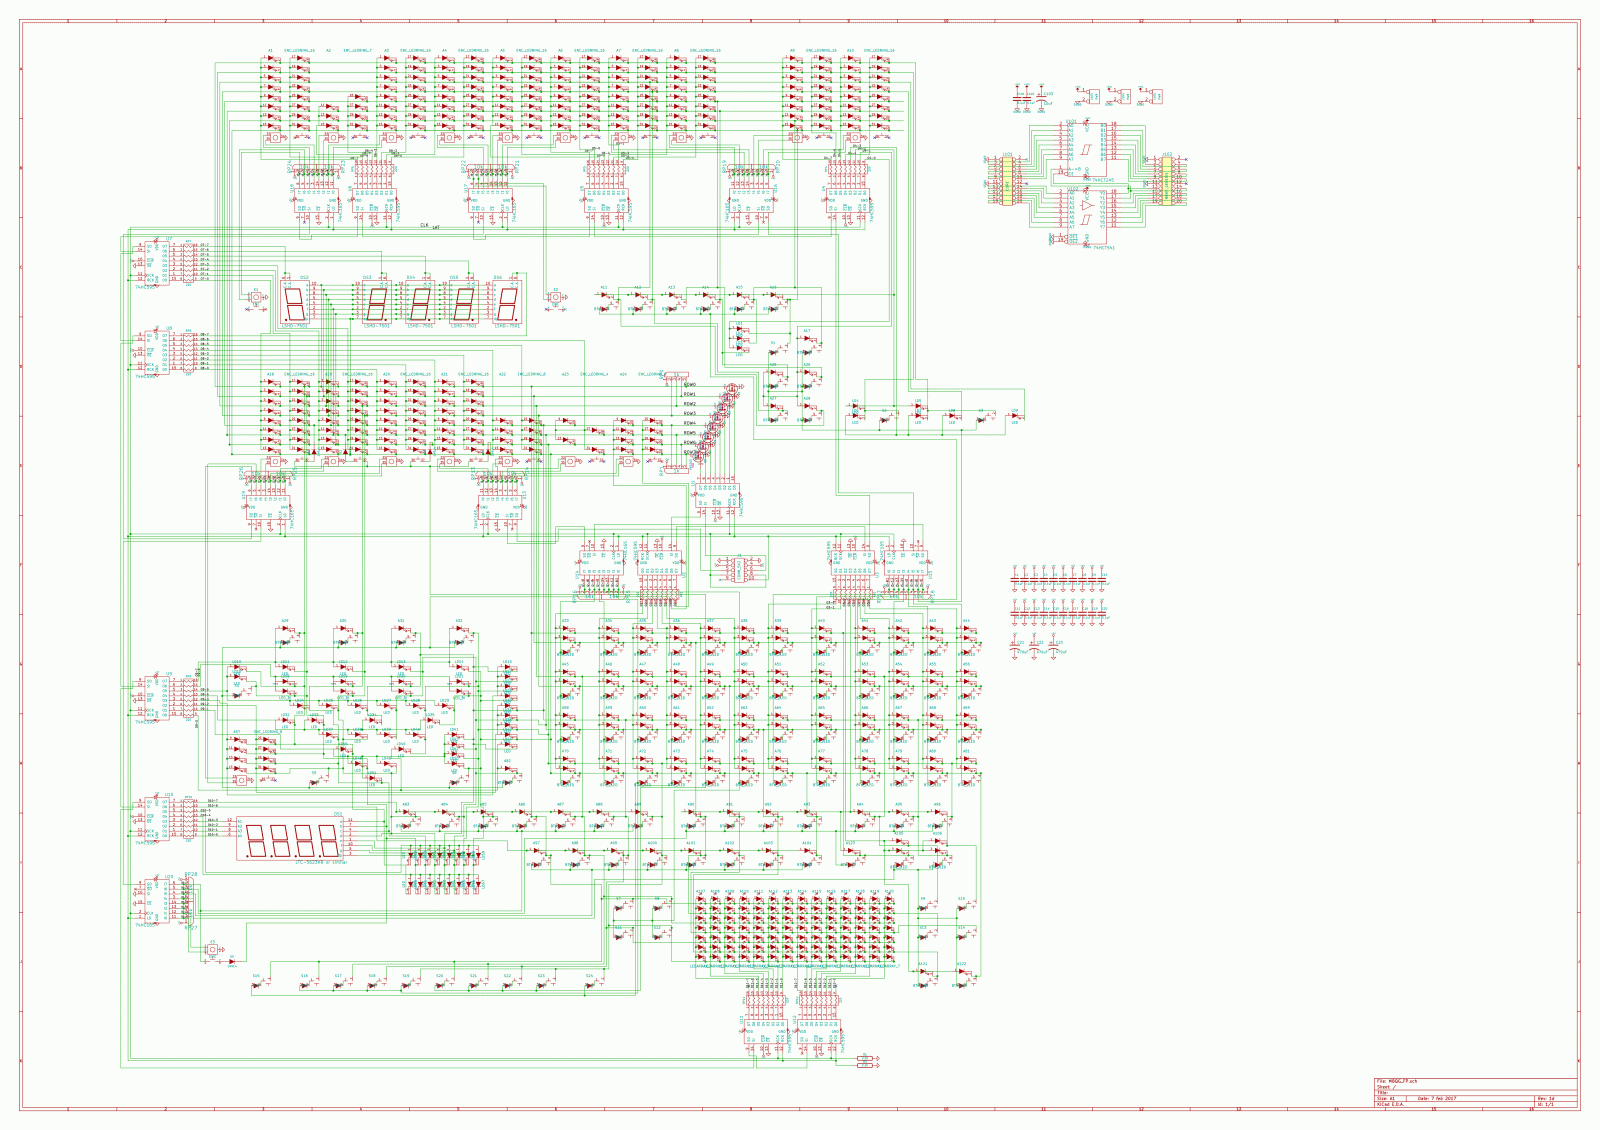 MBQG_FP Board Schematic